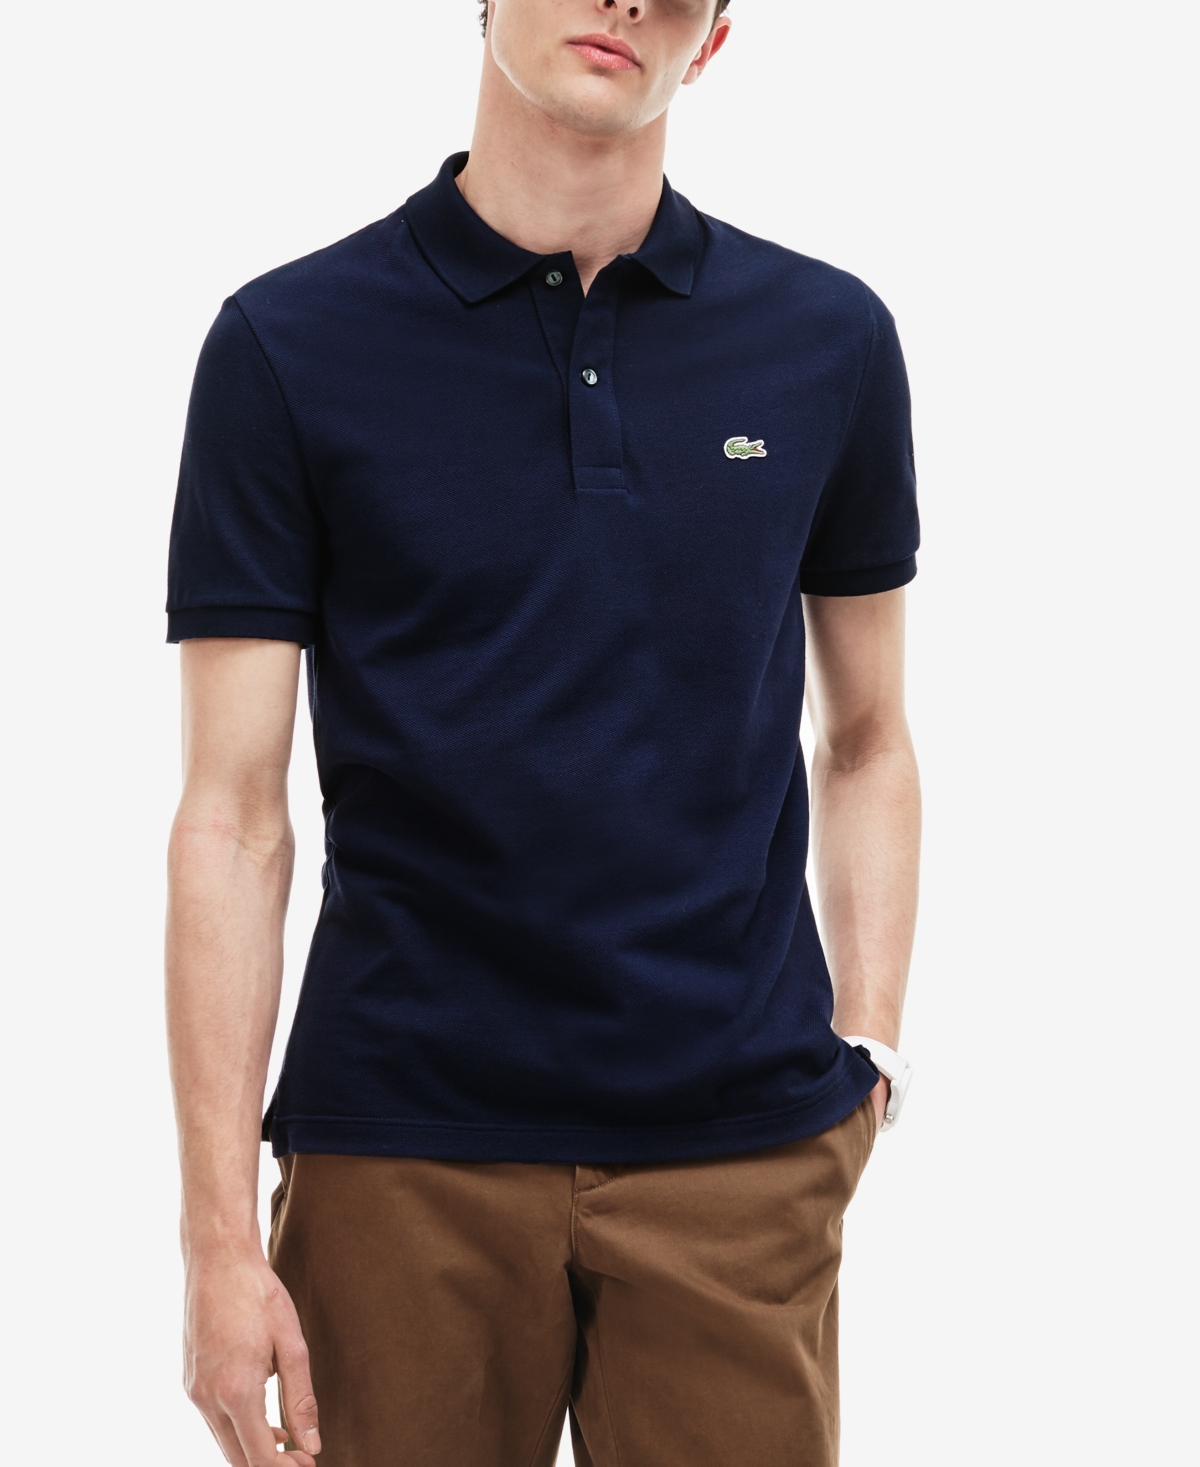 Lacoste Men's Classic Fit L.12.12 Polo In Navy Blue